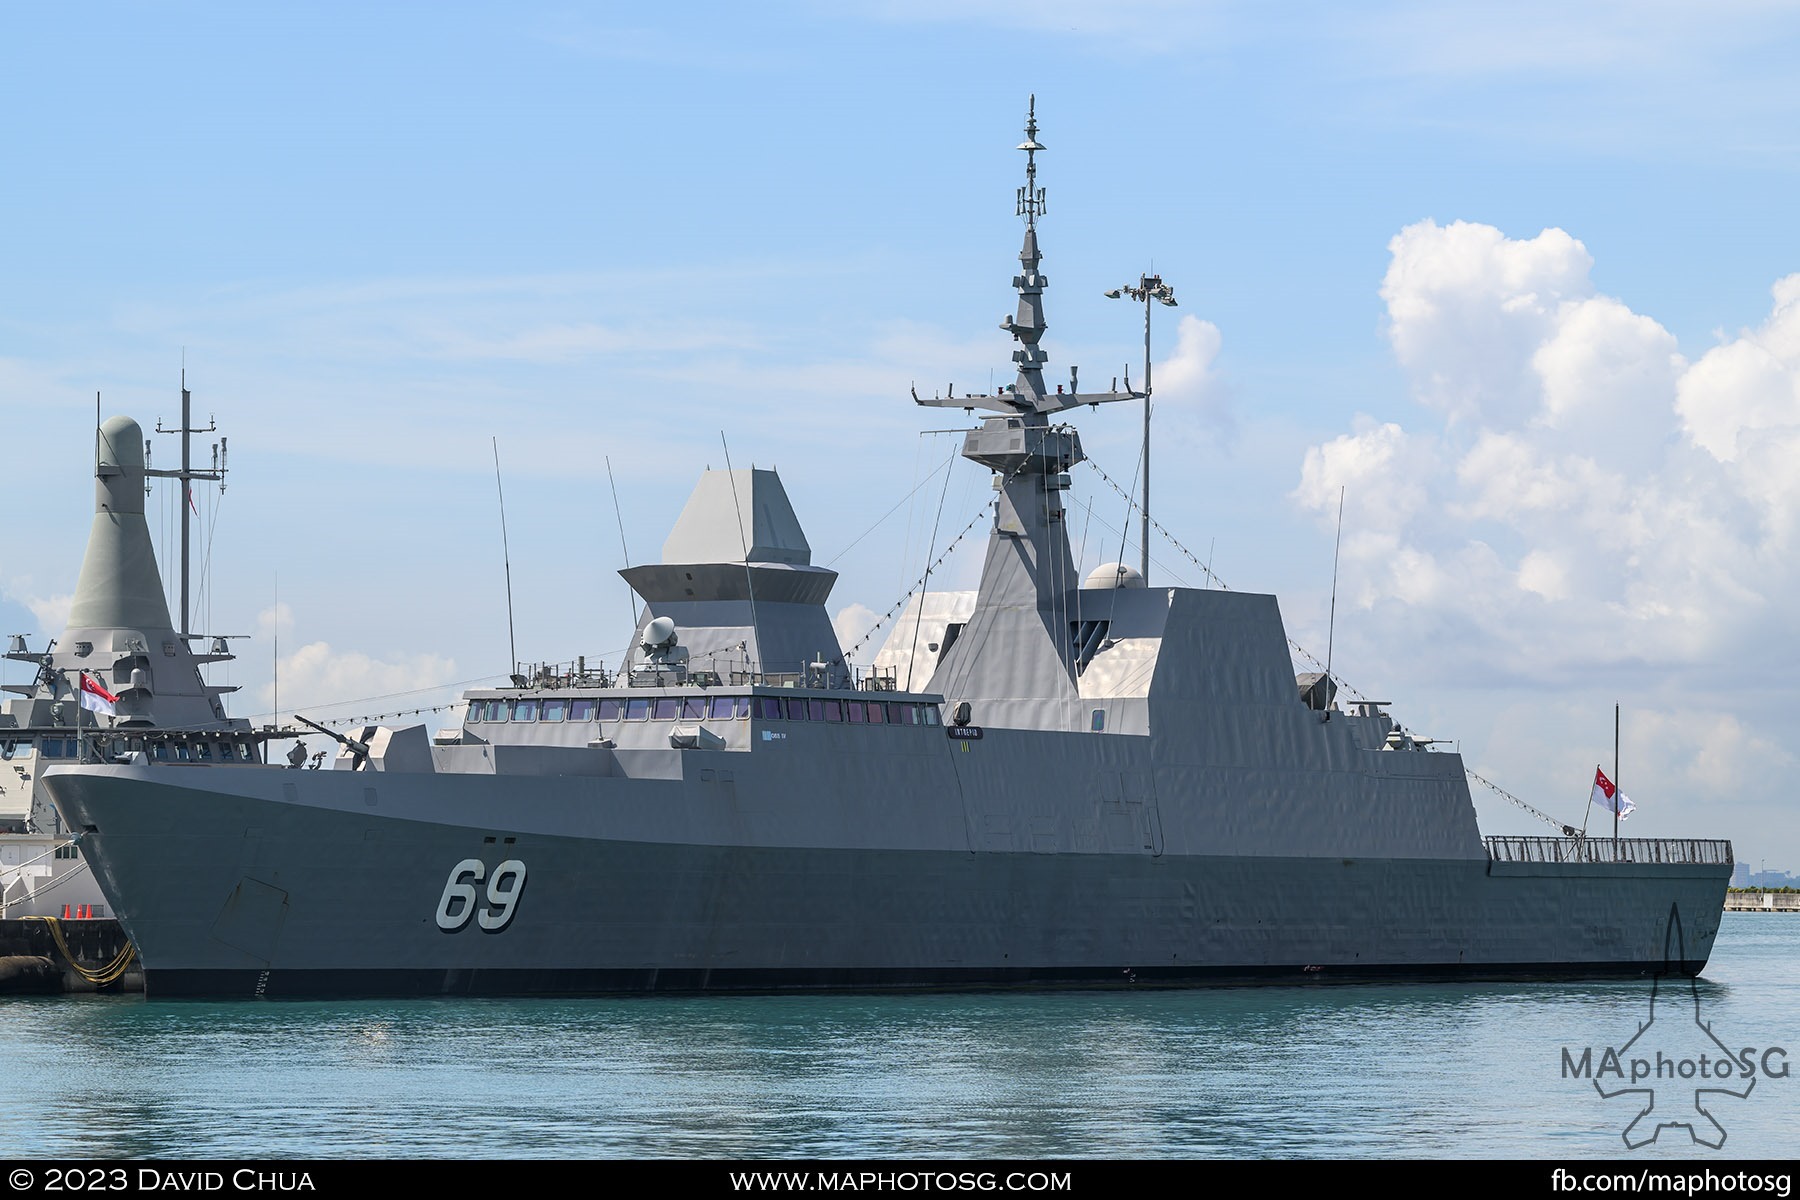 RSS Intrepid (69). Formidable-class stealth frigate of the Republic of Singapore Navy.